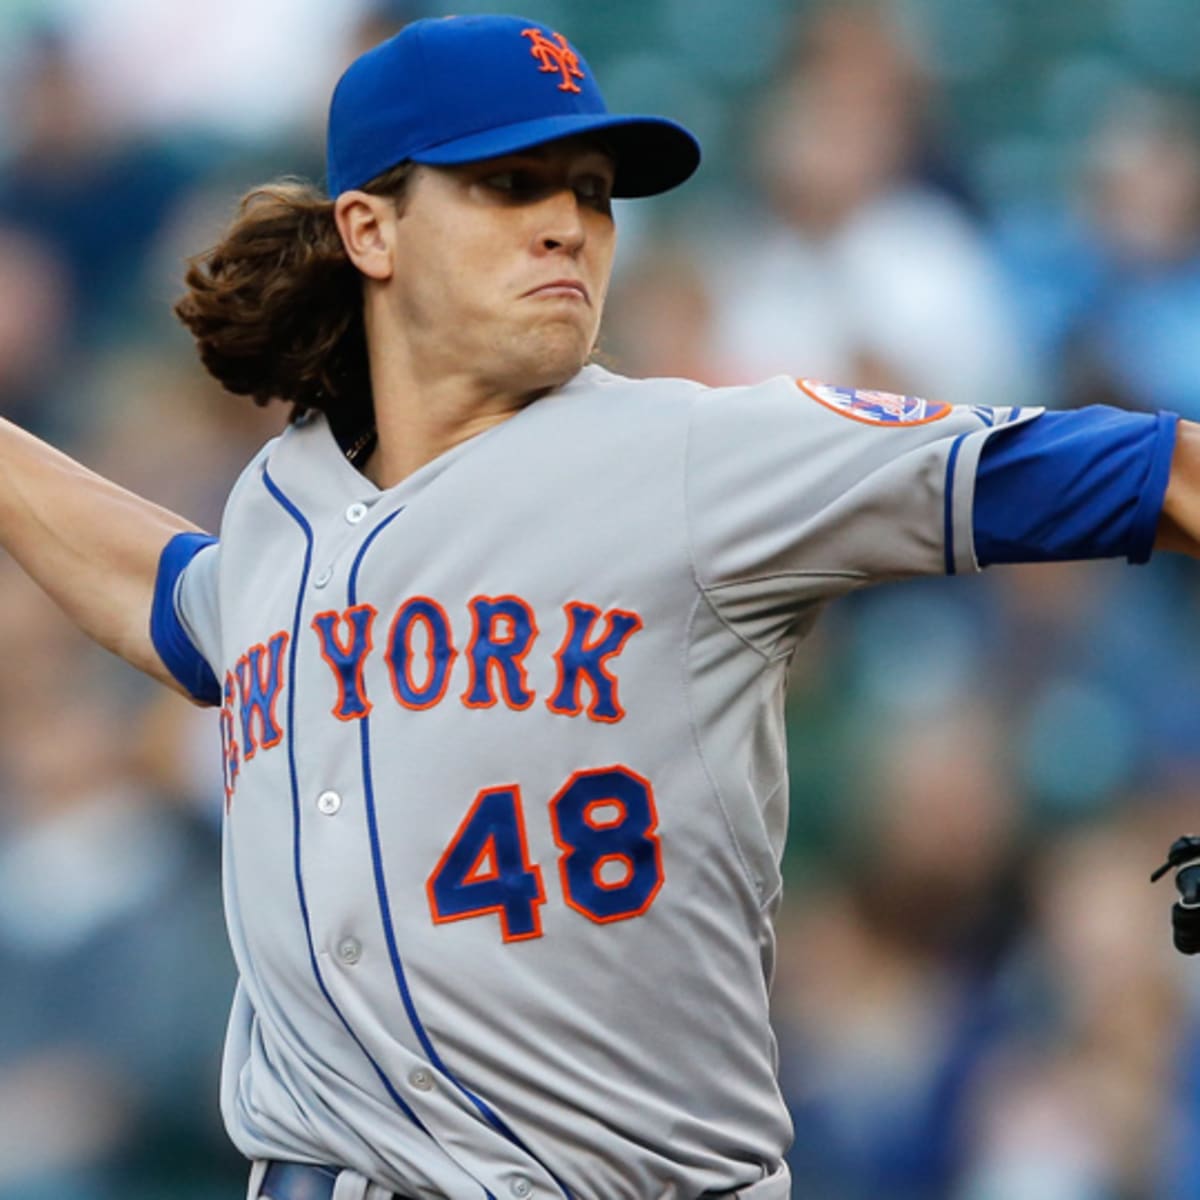 Jacob deGrom returns to ESPN's MLB ace rankings, but he didn't